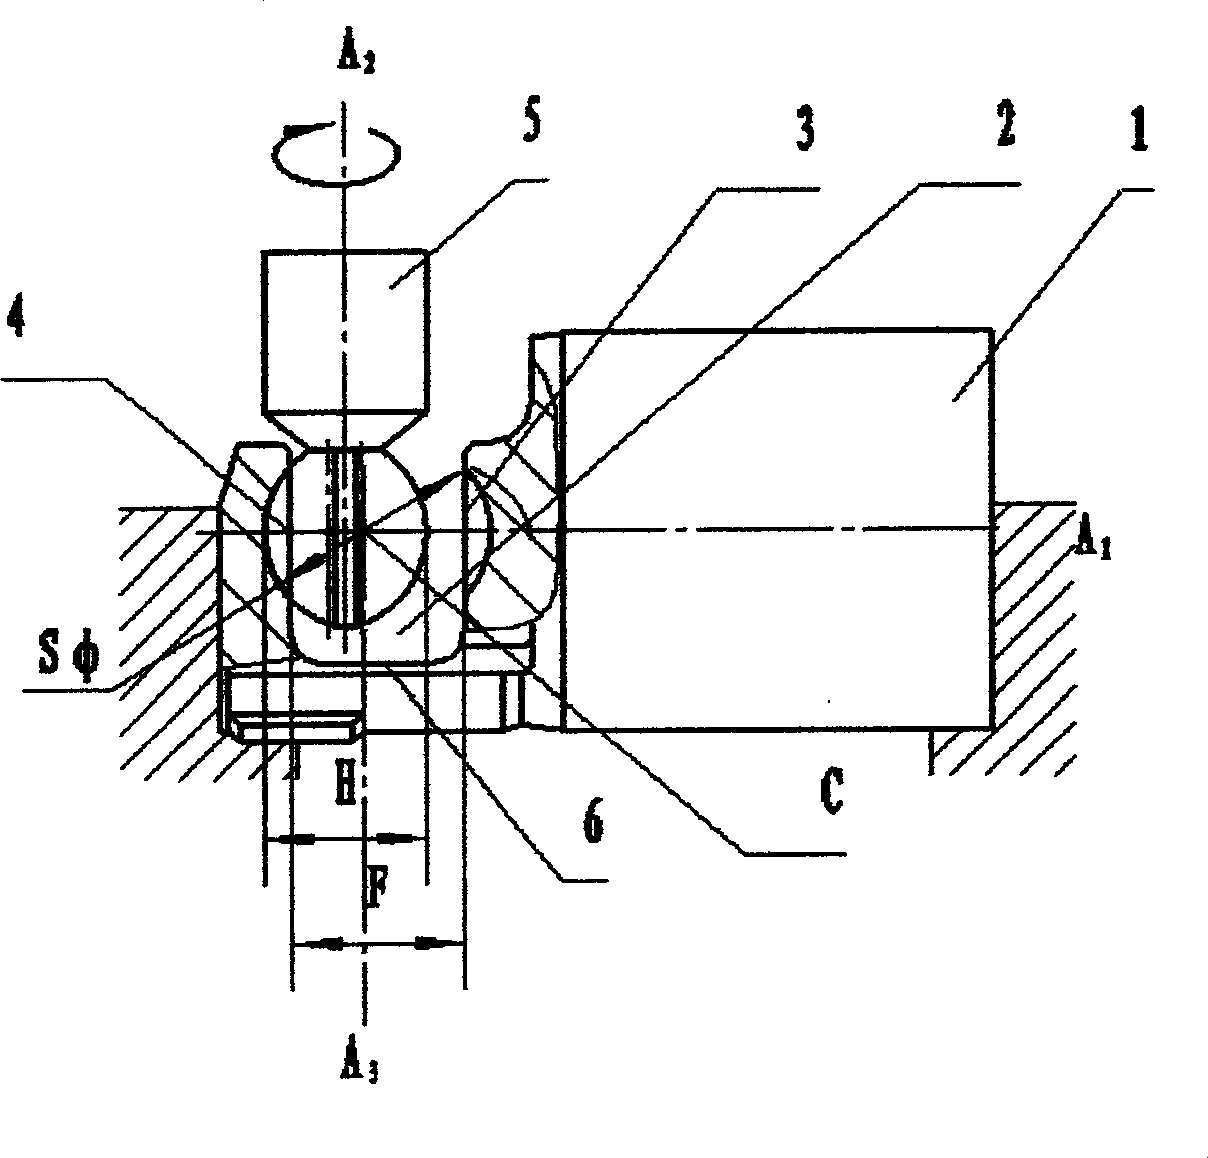 Method for manufacturing pistons of compressor